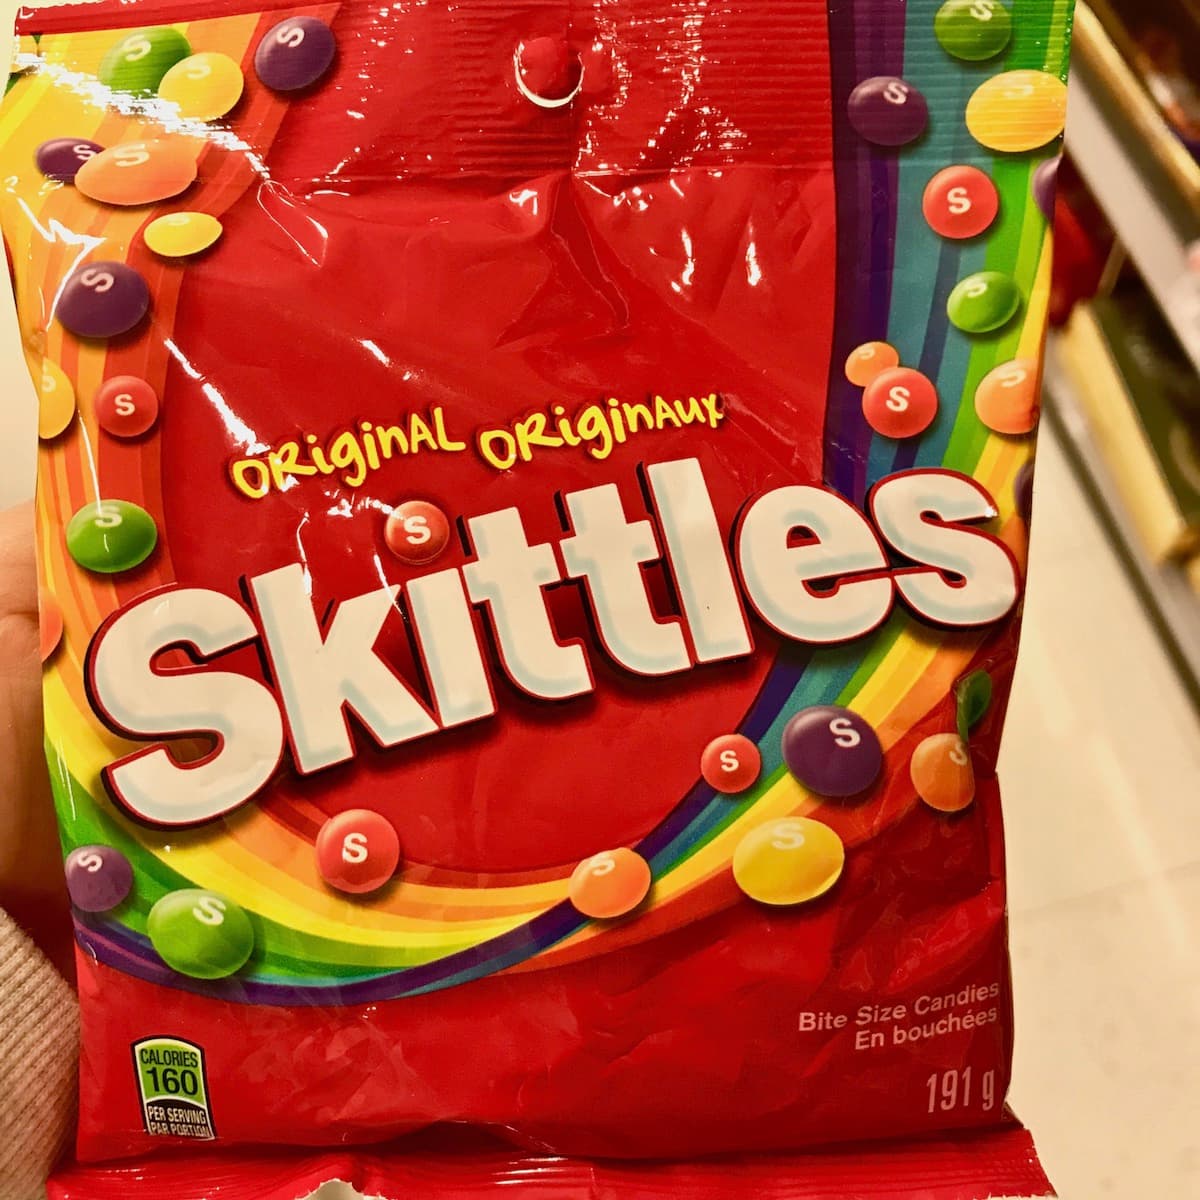 A red package of Original Skittles.